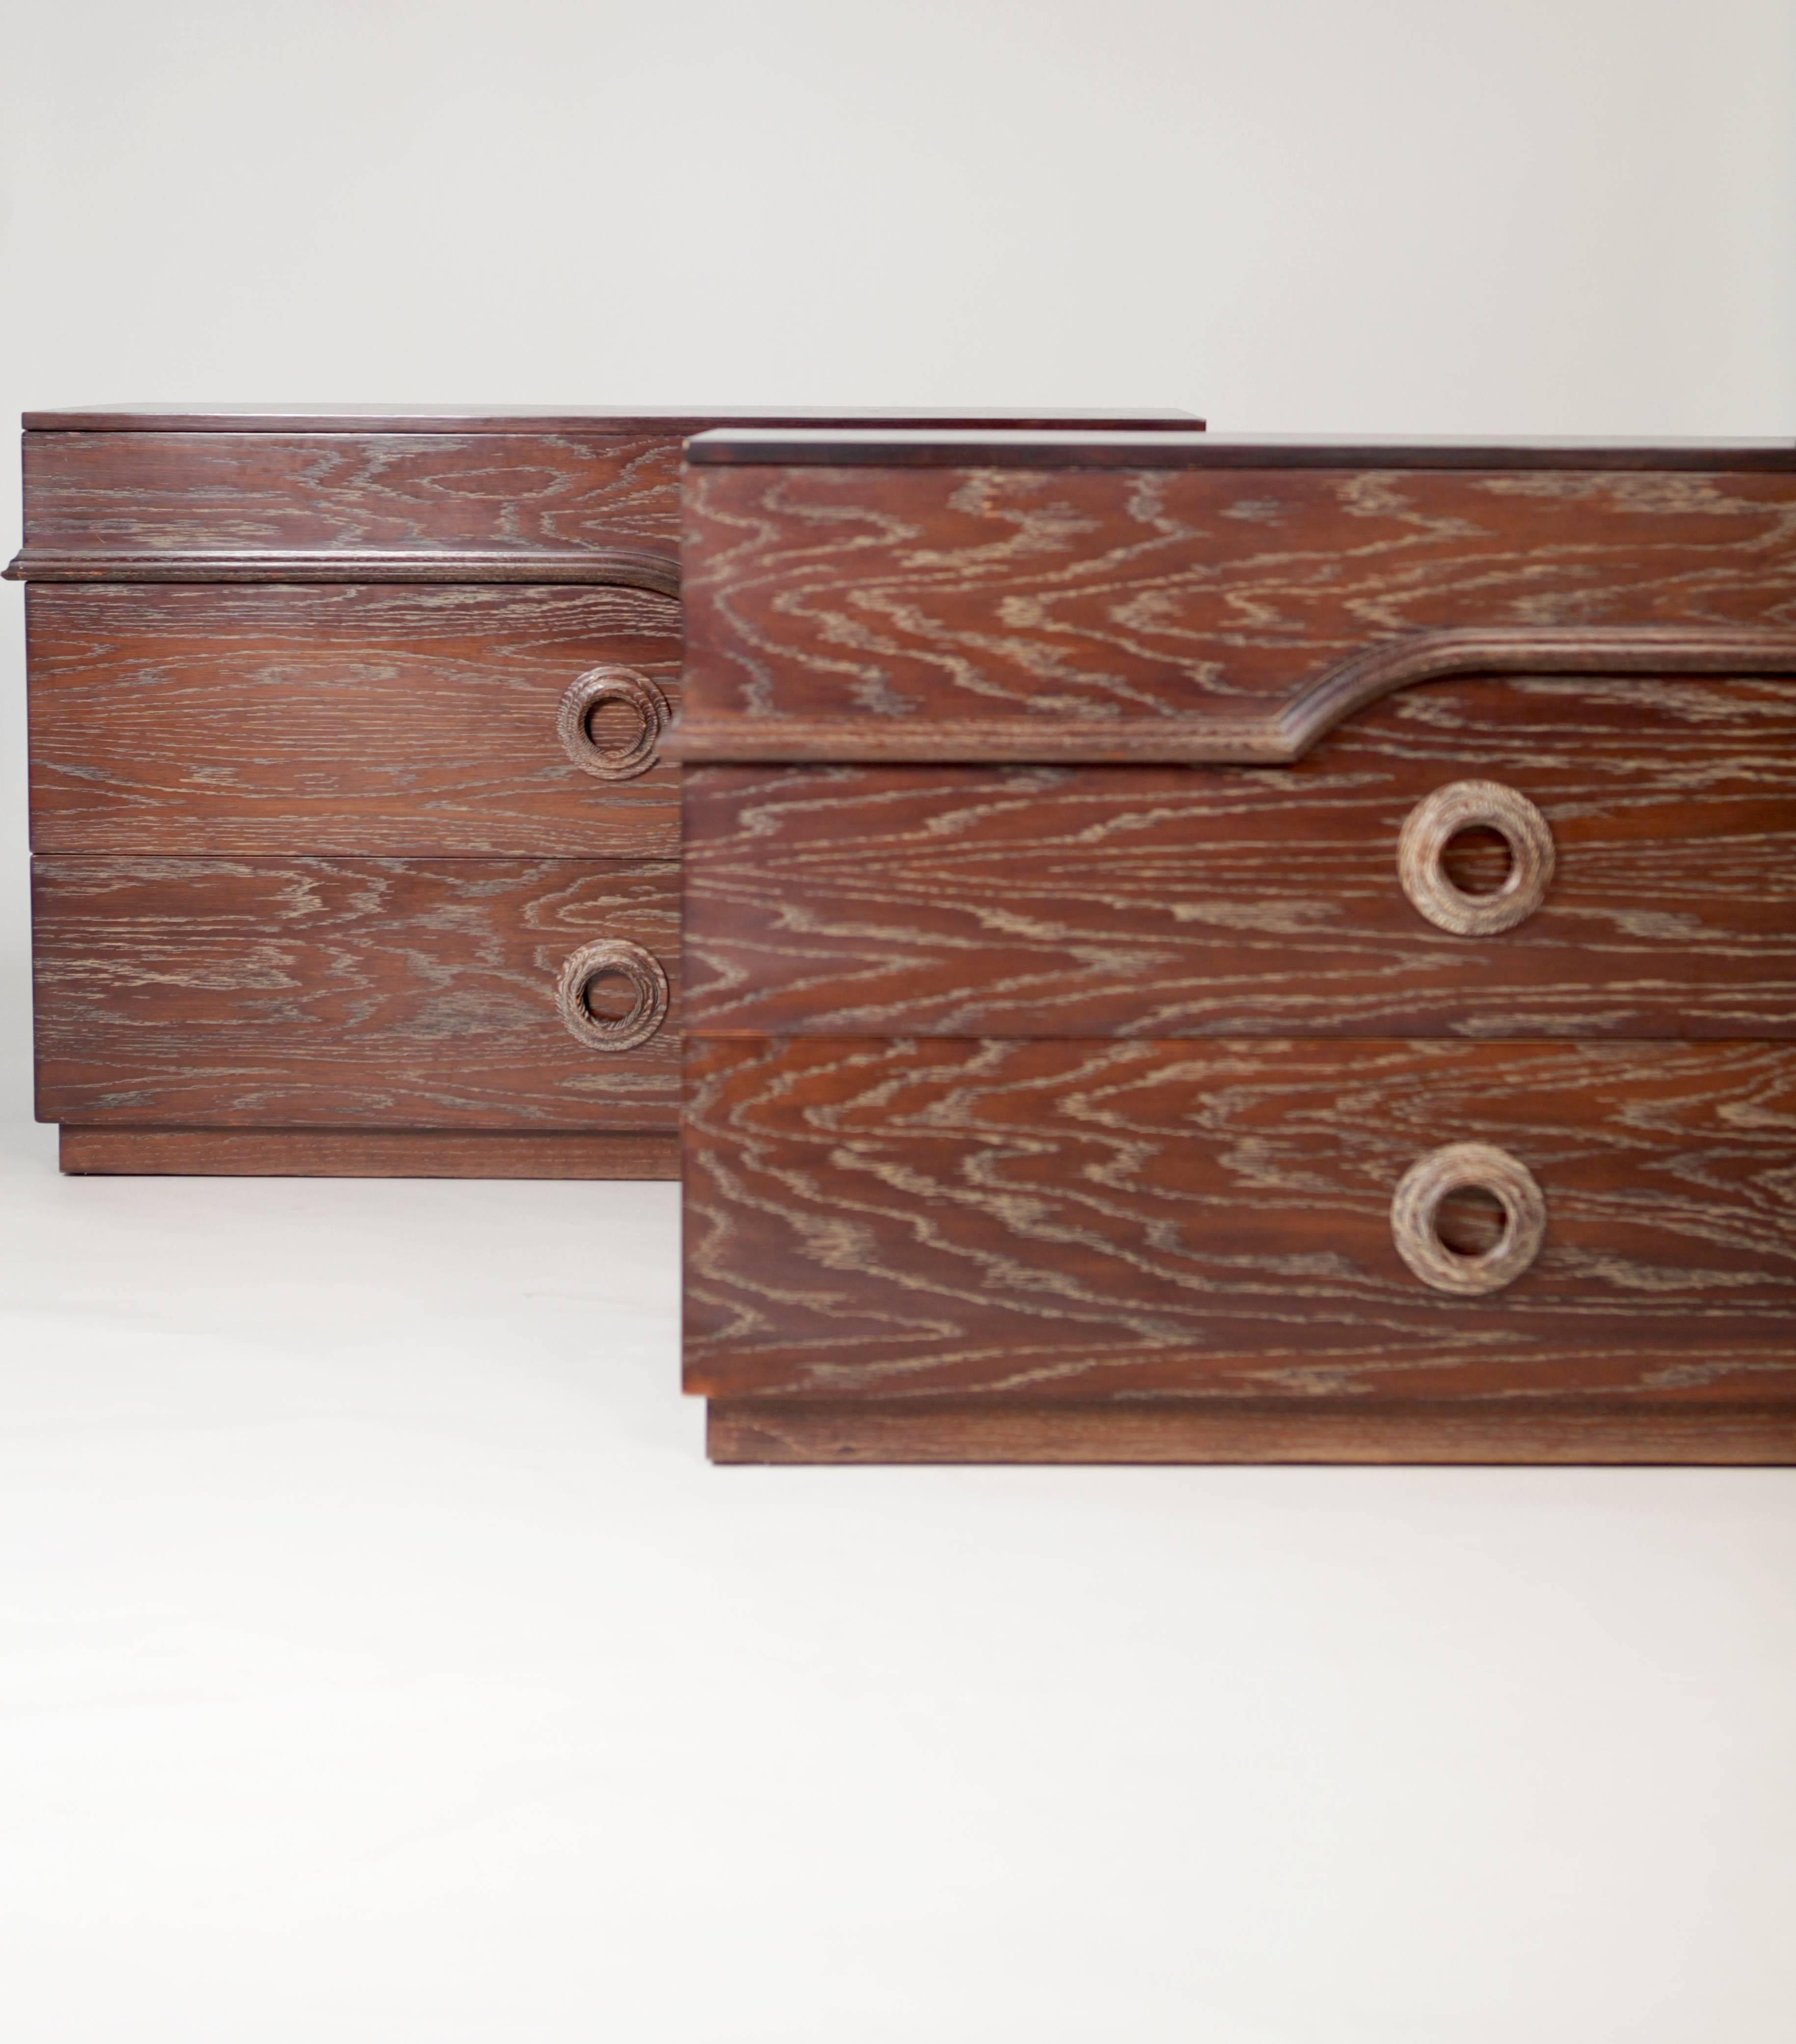 James Mont (1904-1978)
A pair of cerused oak chest of drawers,
circa 1940, each with three drawers,
signed James Mont design.